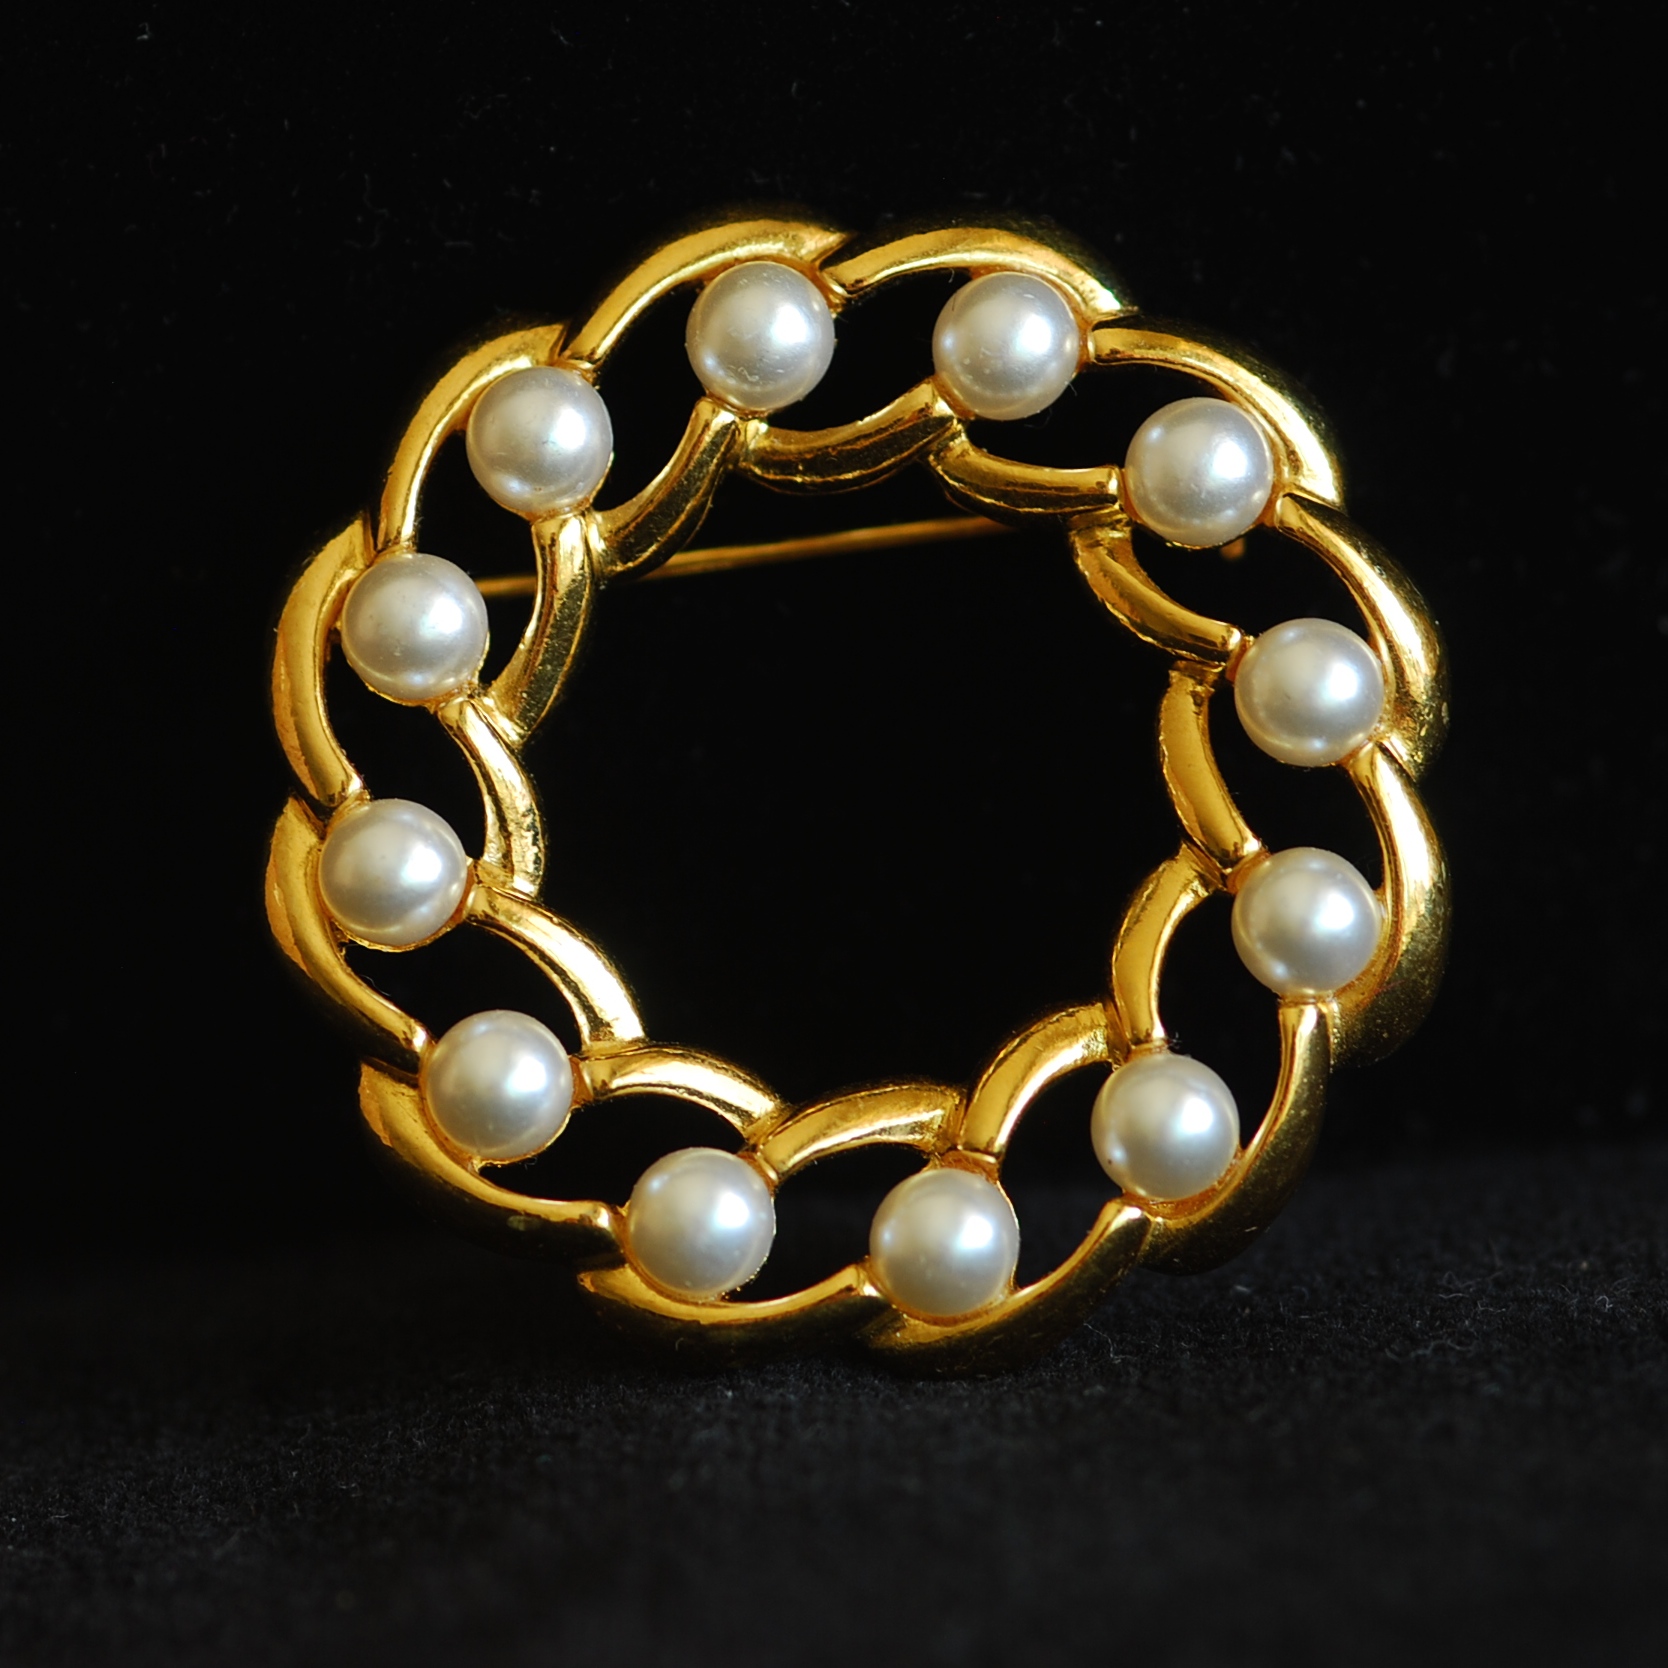 Napier 1960’s Gold Tone Wreath Pin Featuring Faux Pearls – Signed ...